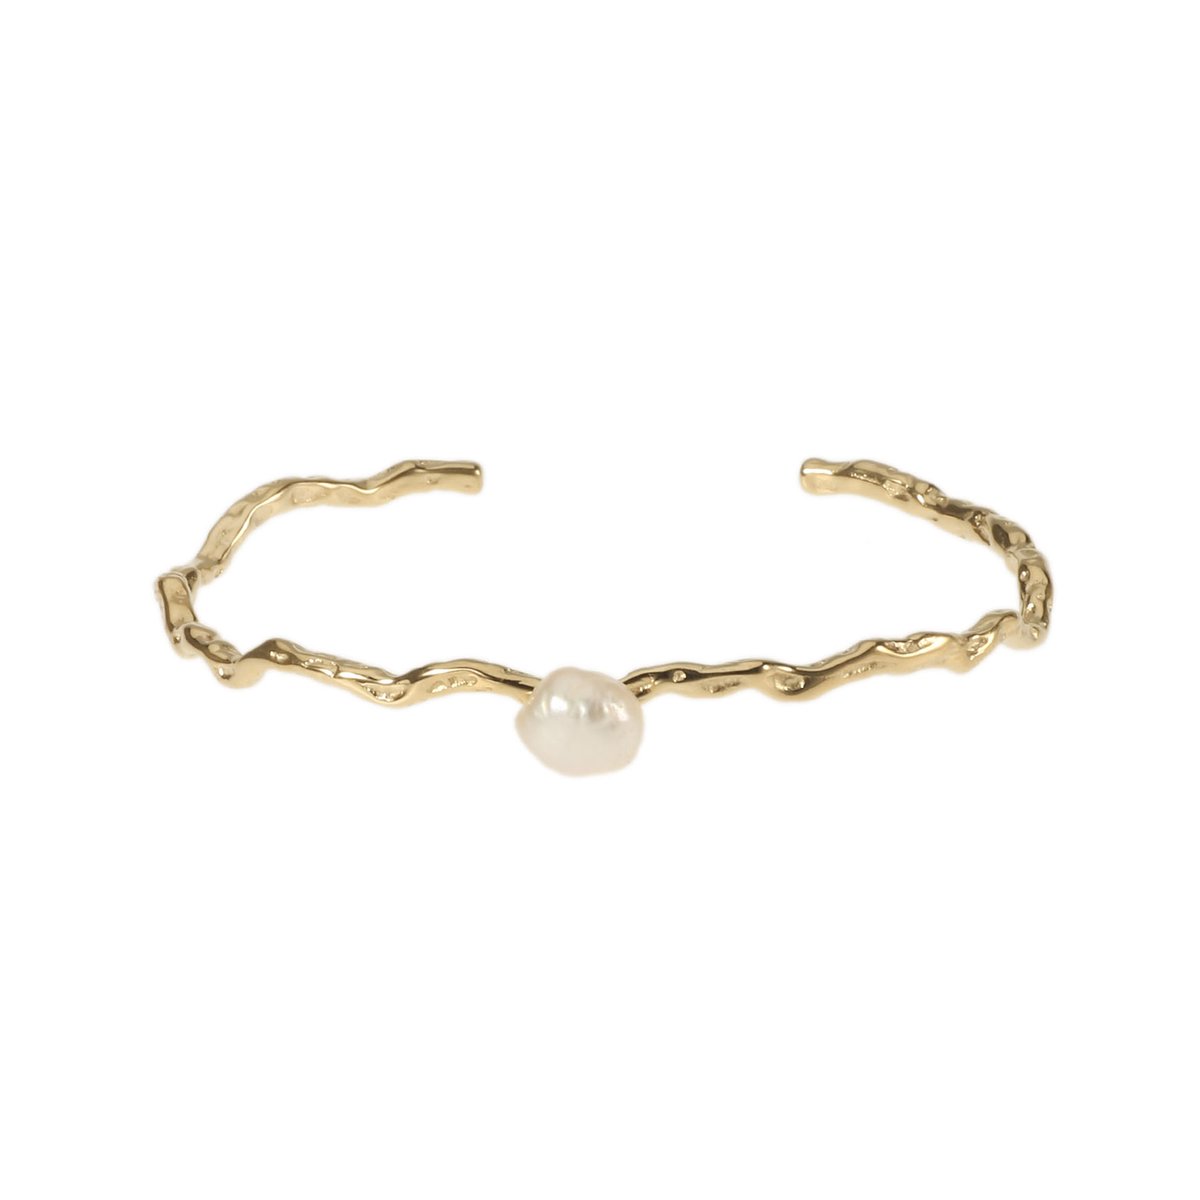 The Jewellery Club - Noe pearl bangle gold - Armband - Dames armband - Parel - Stainless steel - Goud - 6 cm